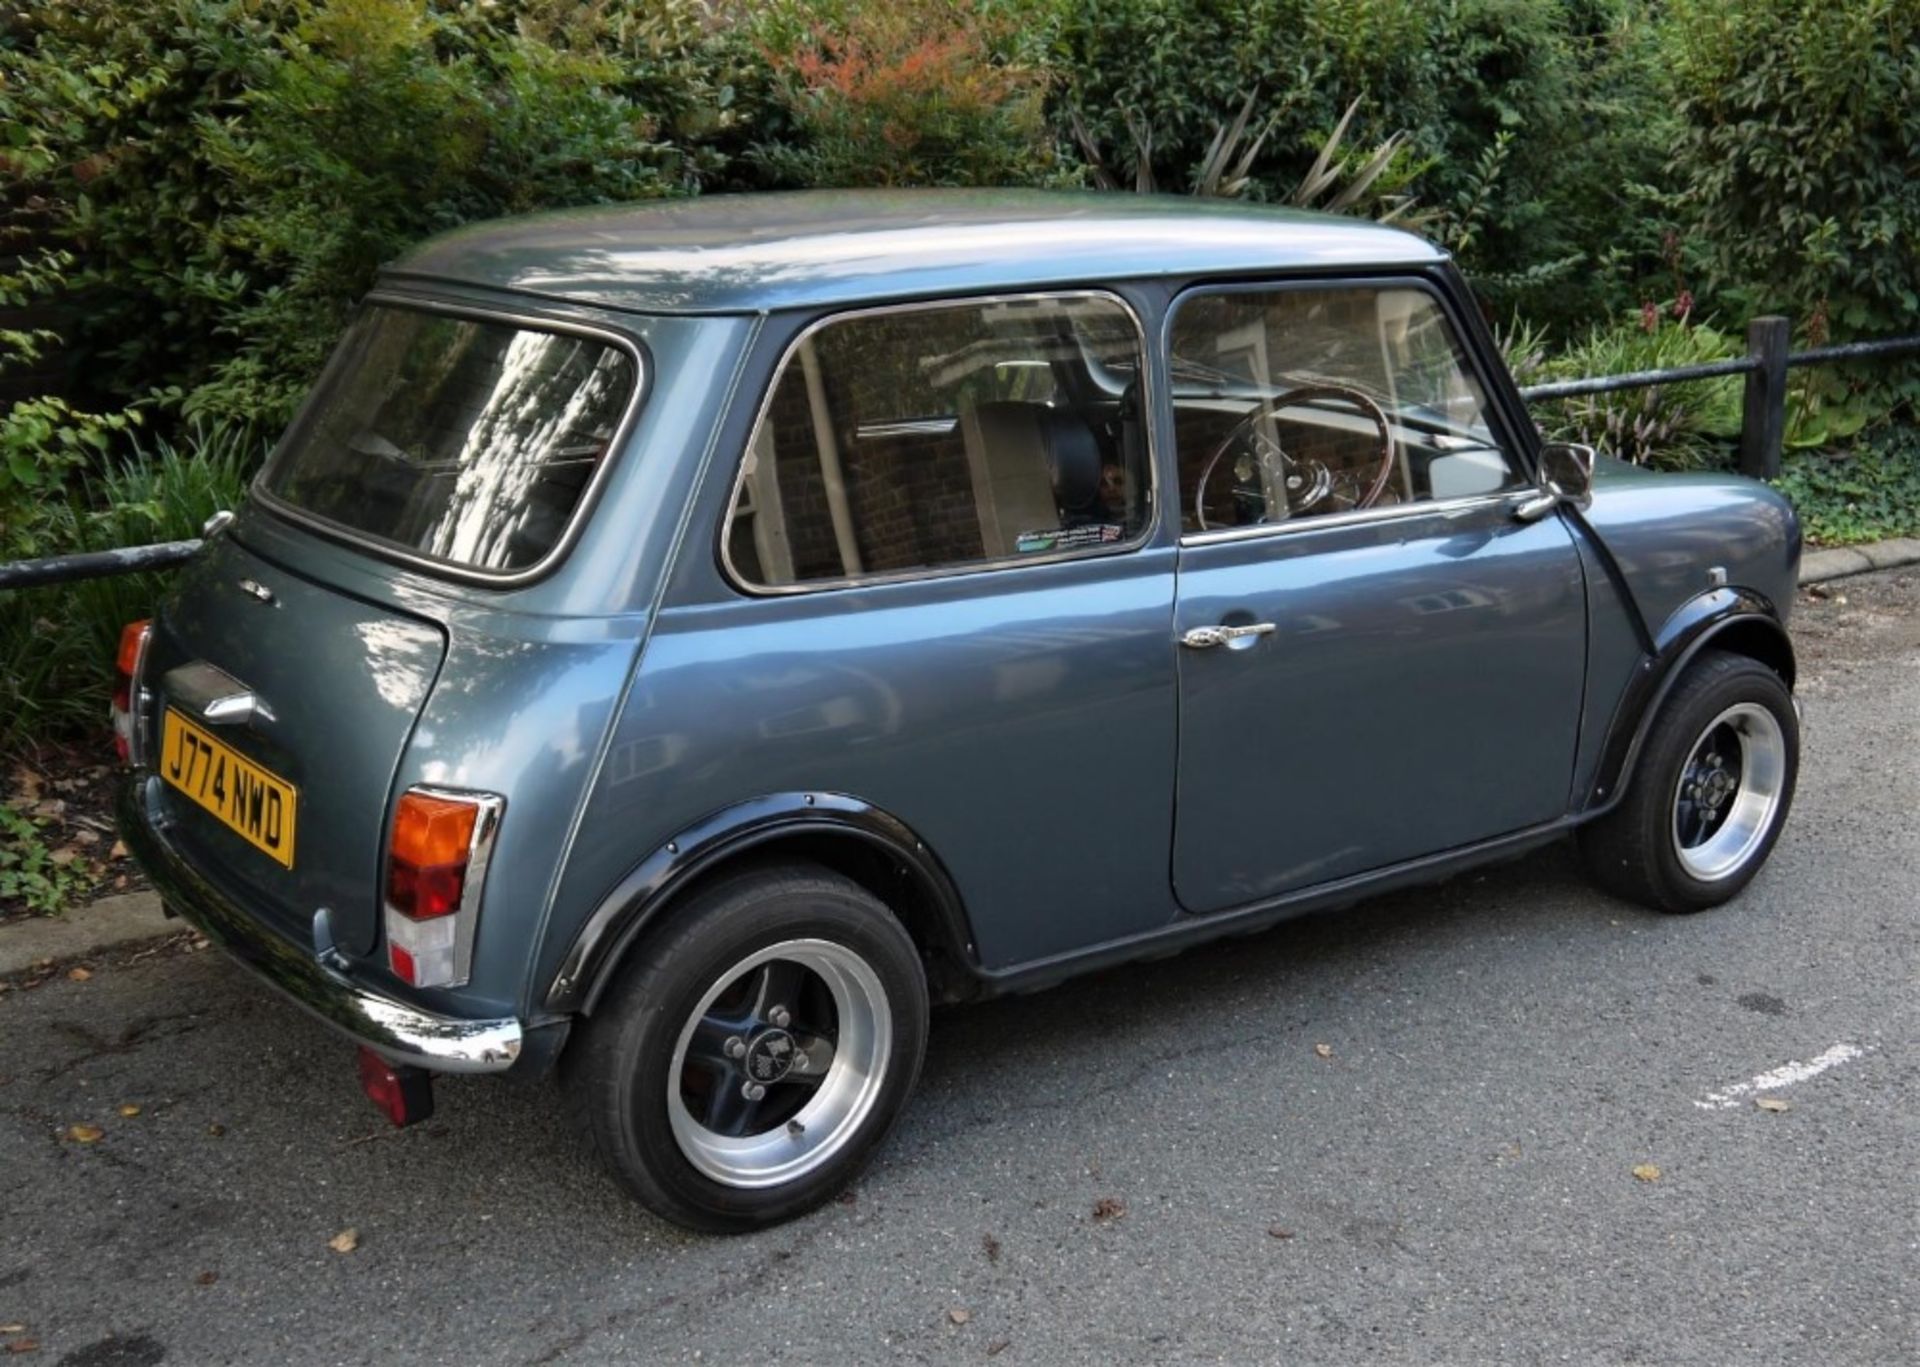 1991 ROVER MINI NEON Registration Number: J774 NWD Recorded Mileage: 58,000 miles Chassis Number: - Image 15 of 24